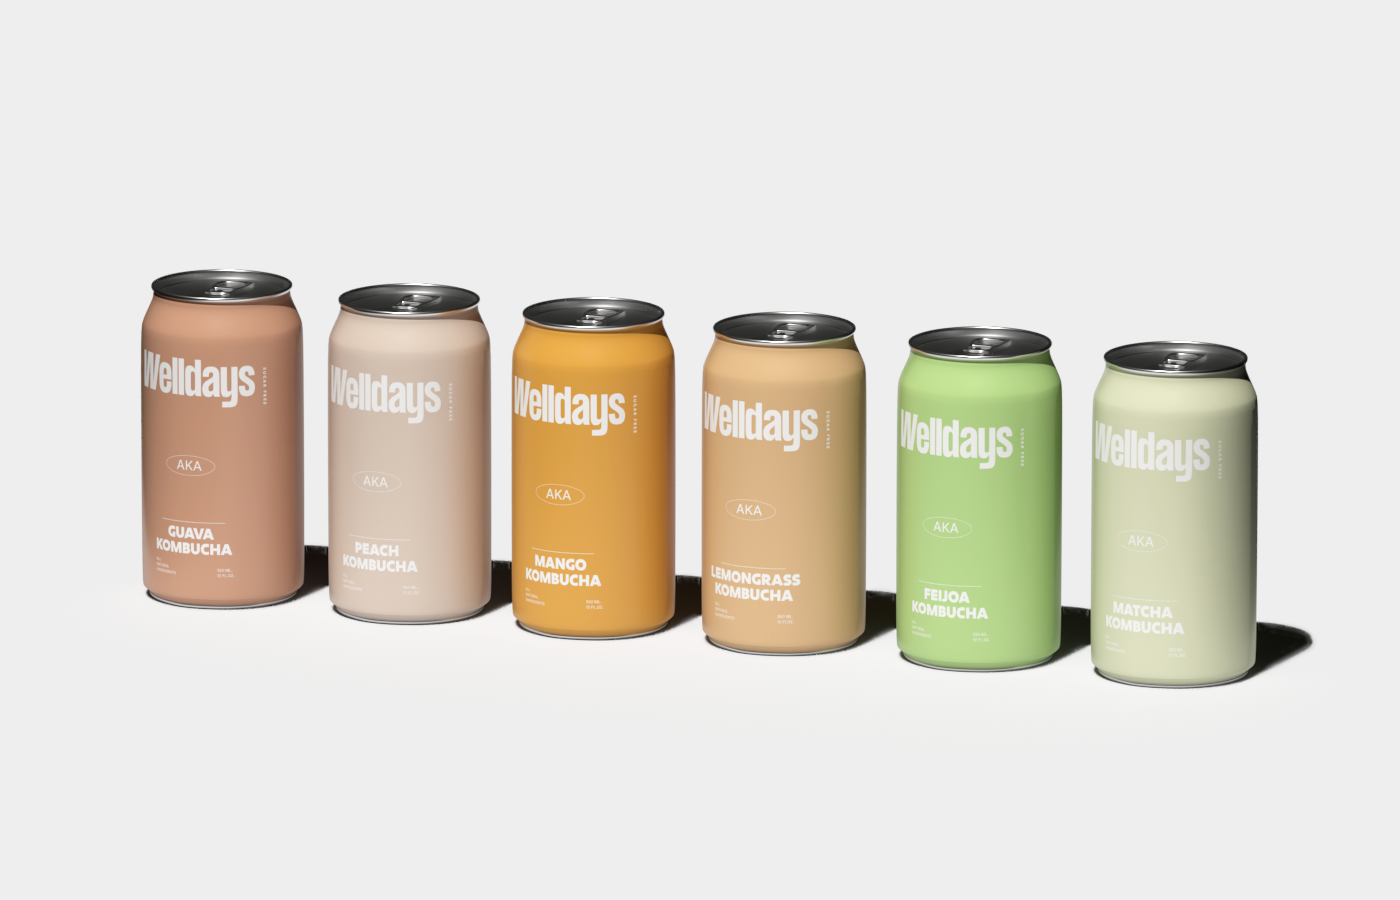 Welldays Kombucha Packaging Is Pure And Simple Just Like The Ingredients